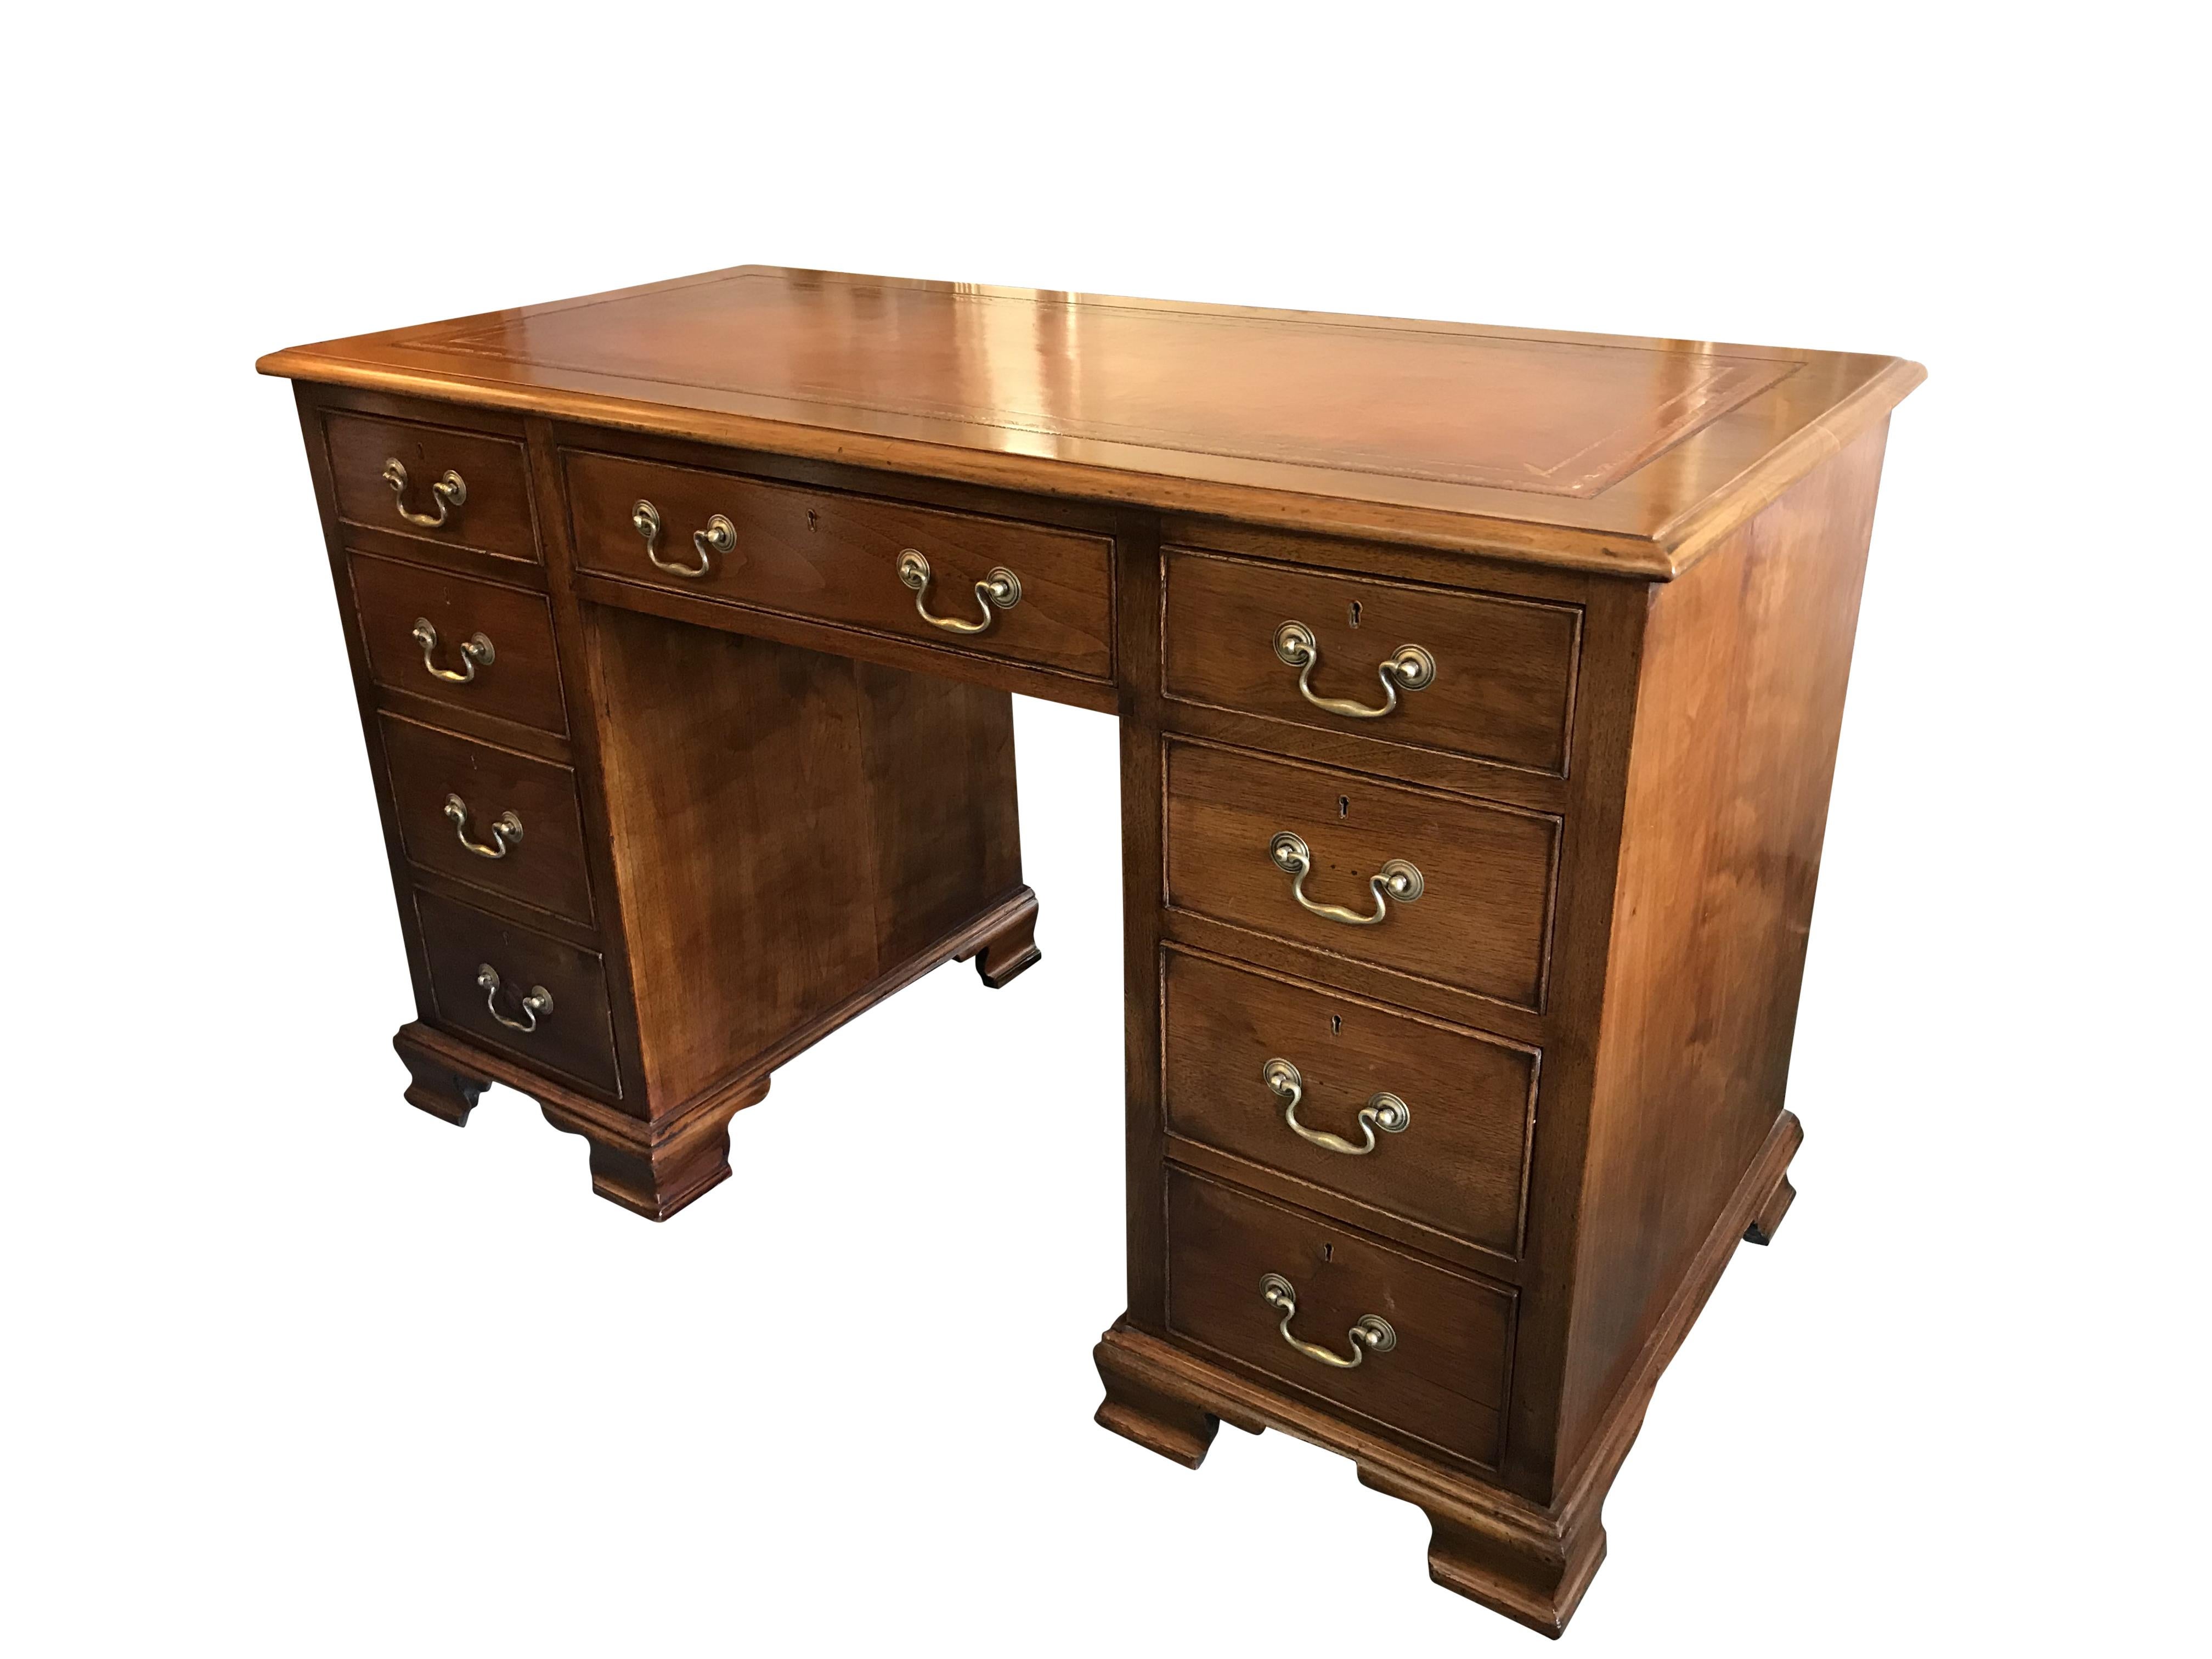 1920s Georgian style twin pedestal one piece kneehole desk with swan neck handles and nine deep drawers, ending on ogee feet. Leather top with gilt tooling is in immaculate condition, as recently replaced by a master craftsman. 

All locks in good